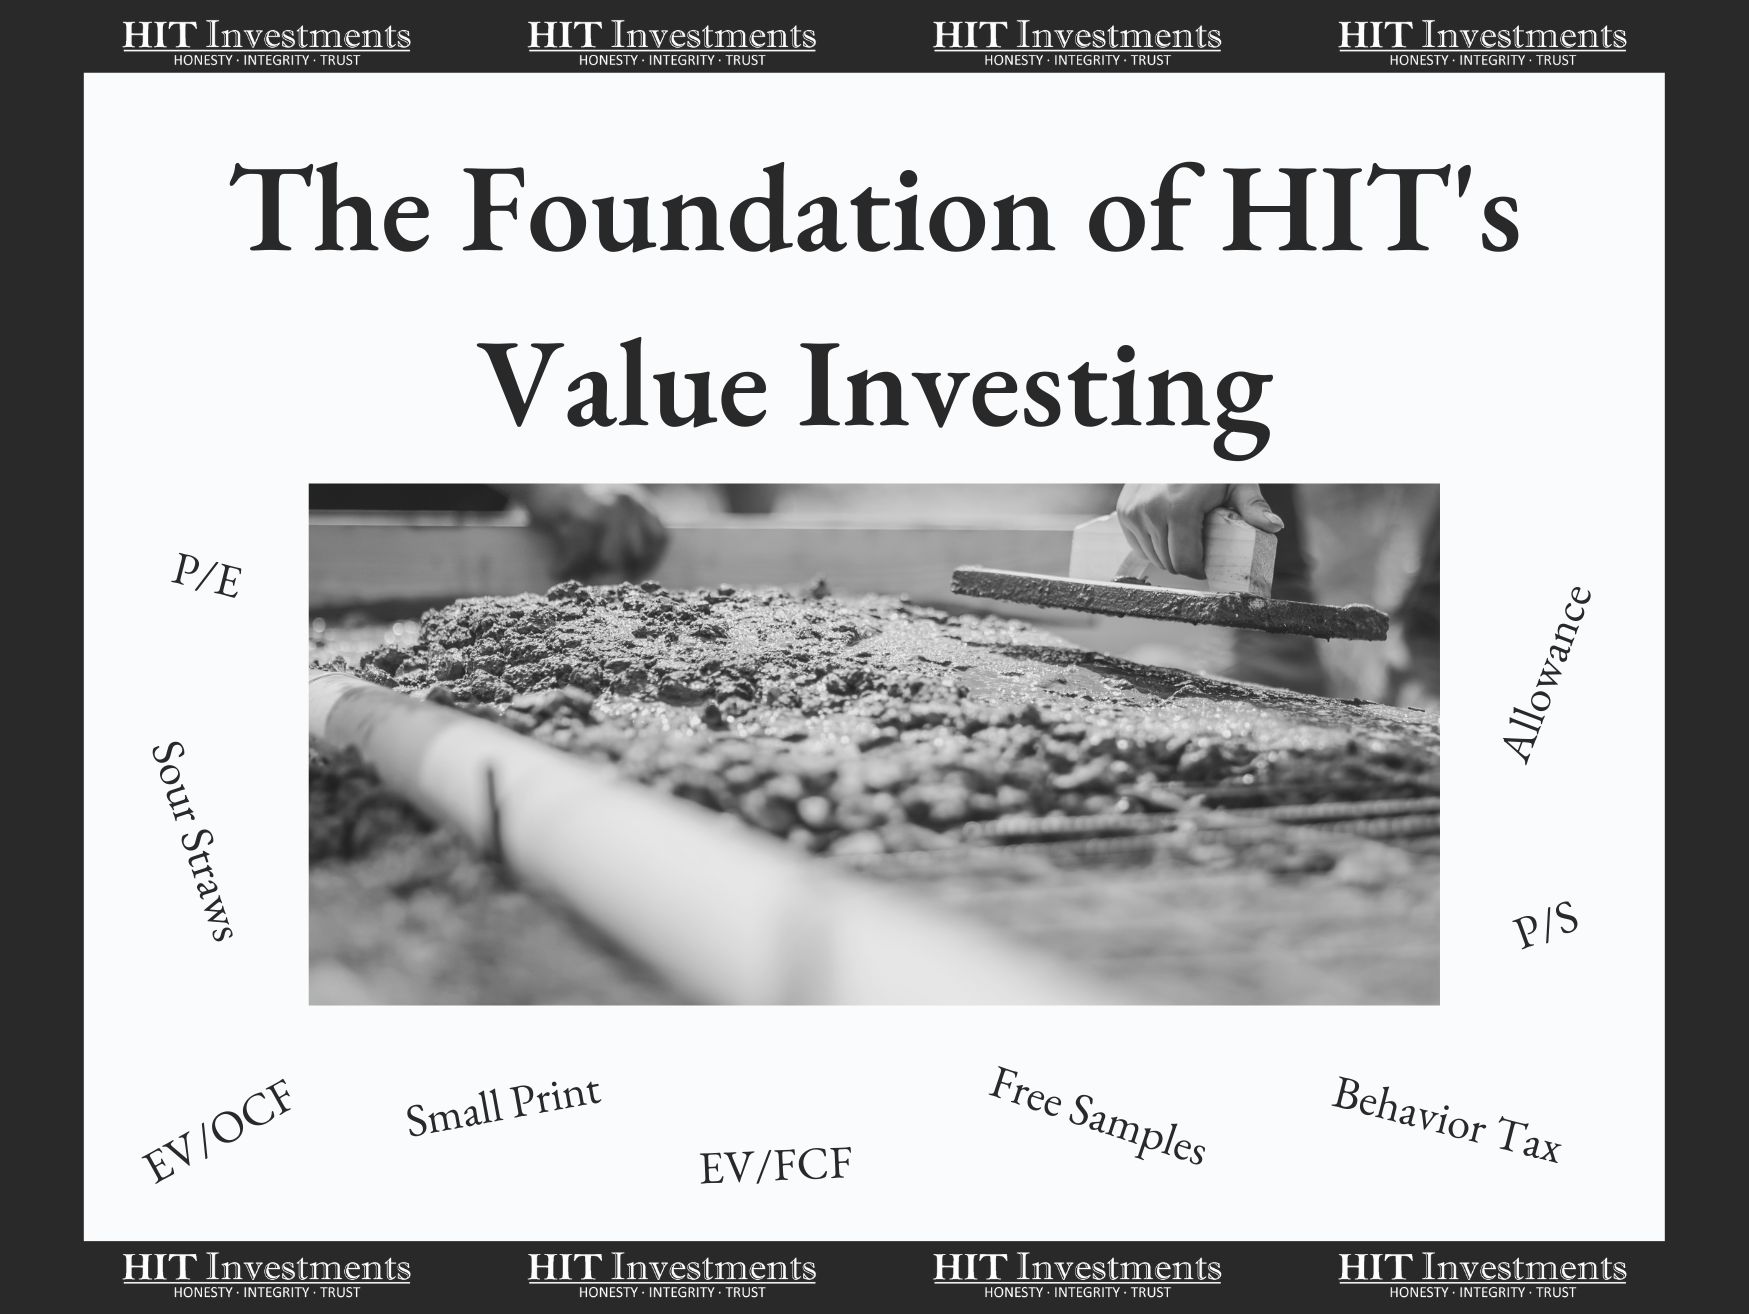 HIT Capital's Start to Value Investing